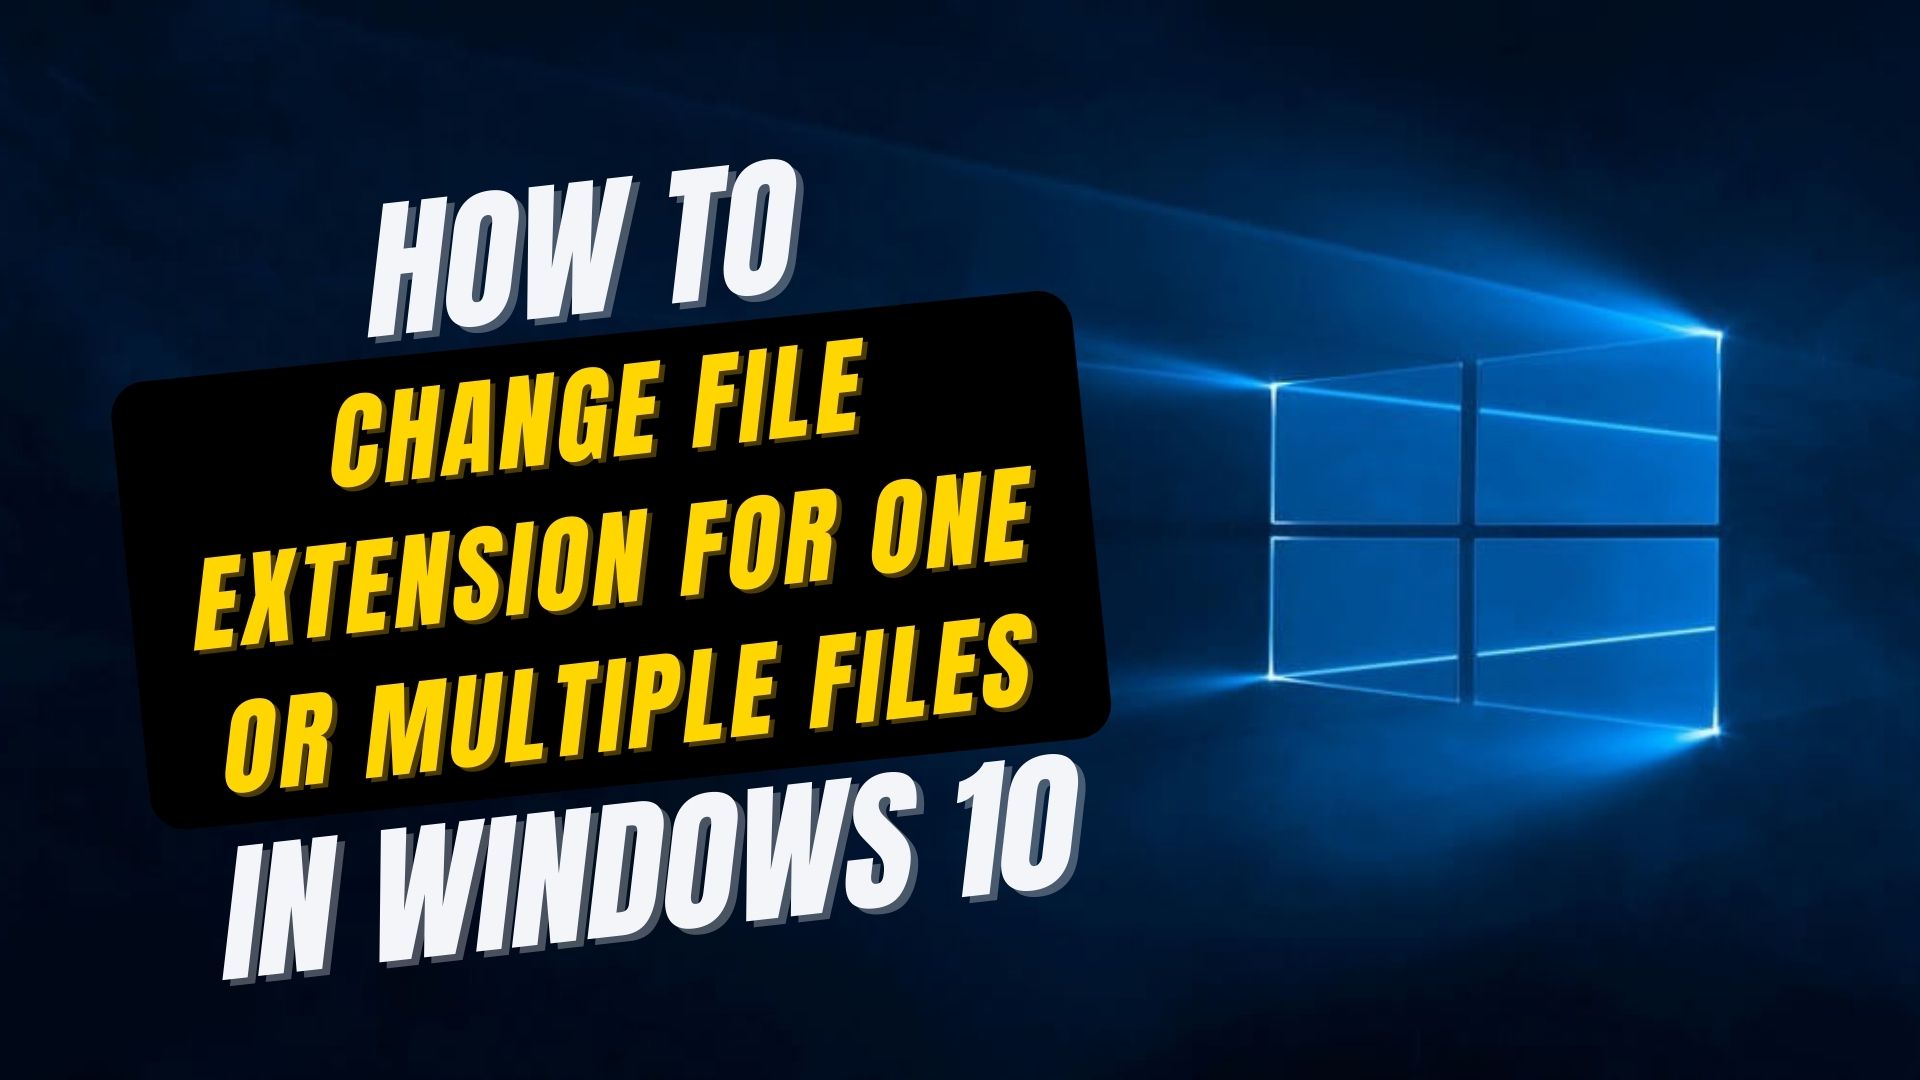 Change File Extension for One or Multiple Files